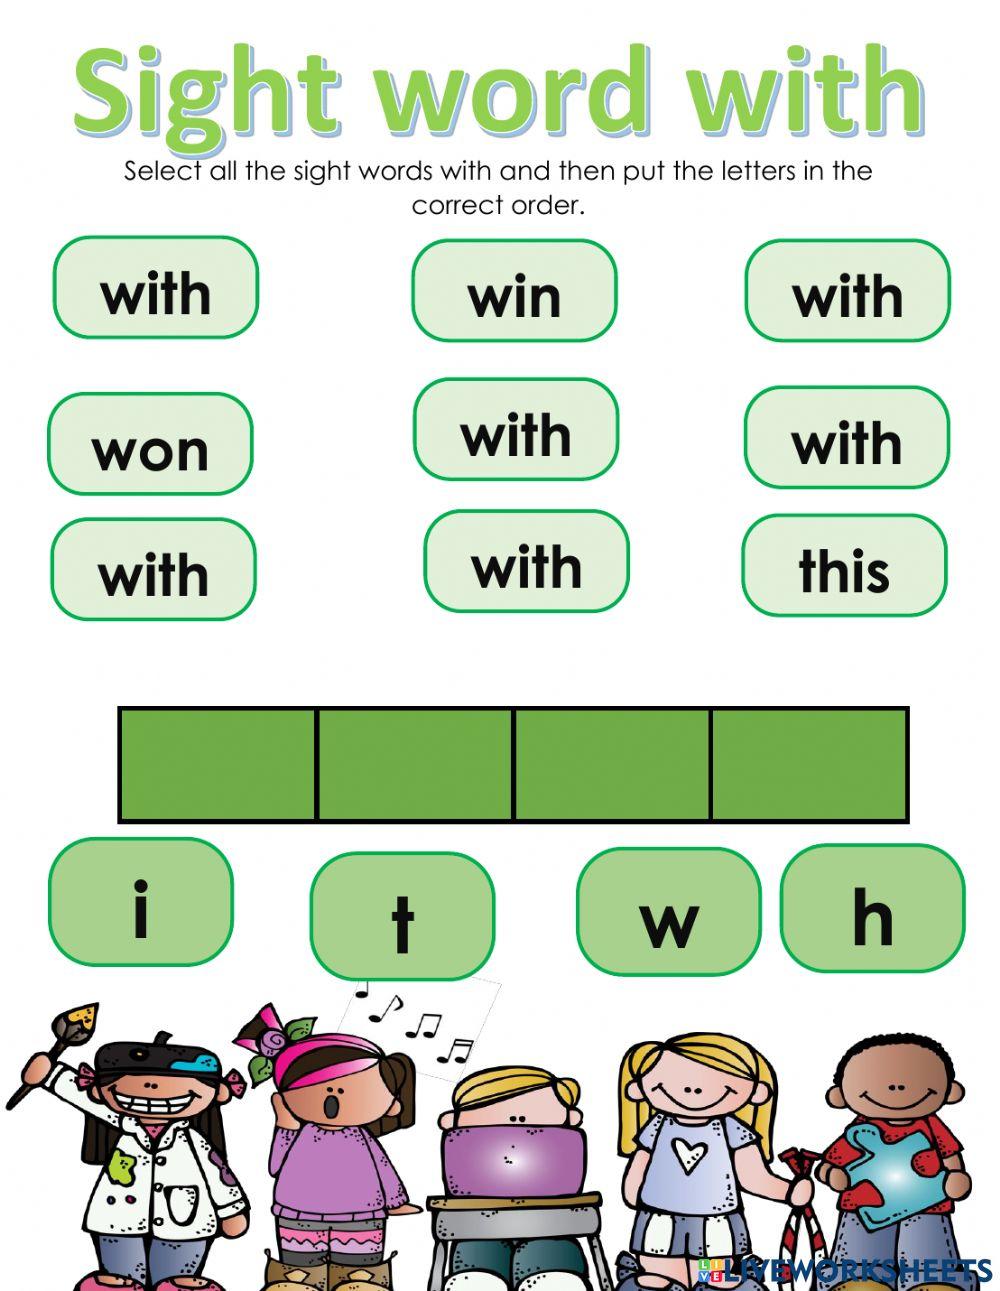 Sight word with